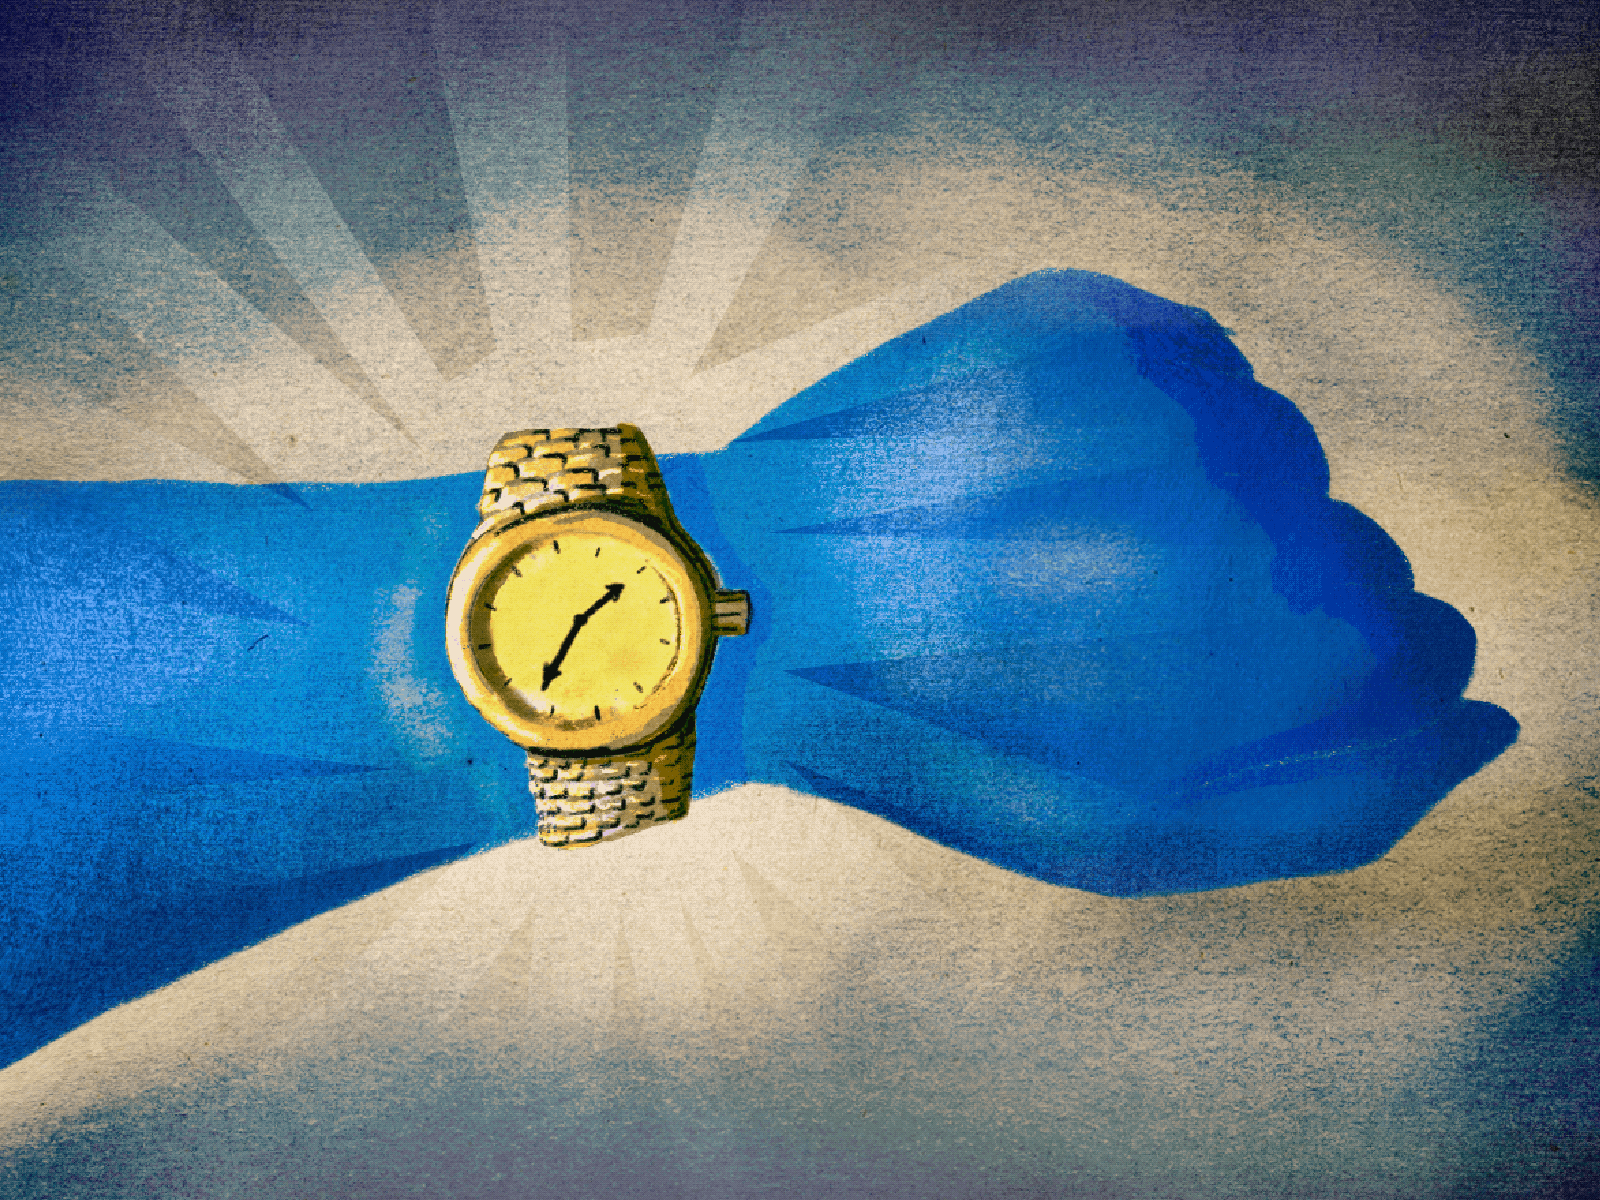 Editorial Illustration: Watch Time Run Out animated illustration animation business concept art editorial illustration illustration ipad pro luxury magazine motion graphics news article procreate propaganda rolex spot illustration time time illustration watch watch illustration